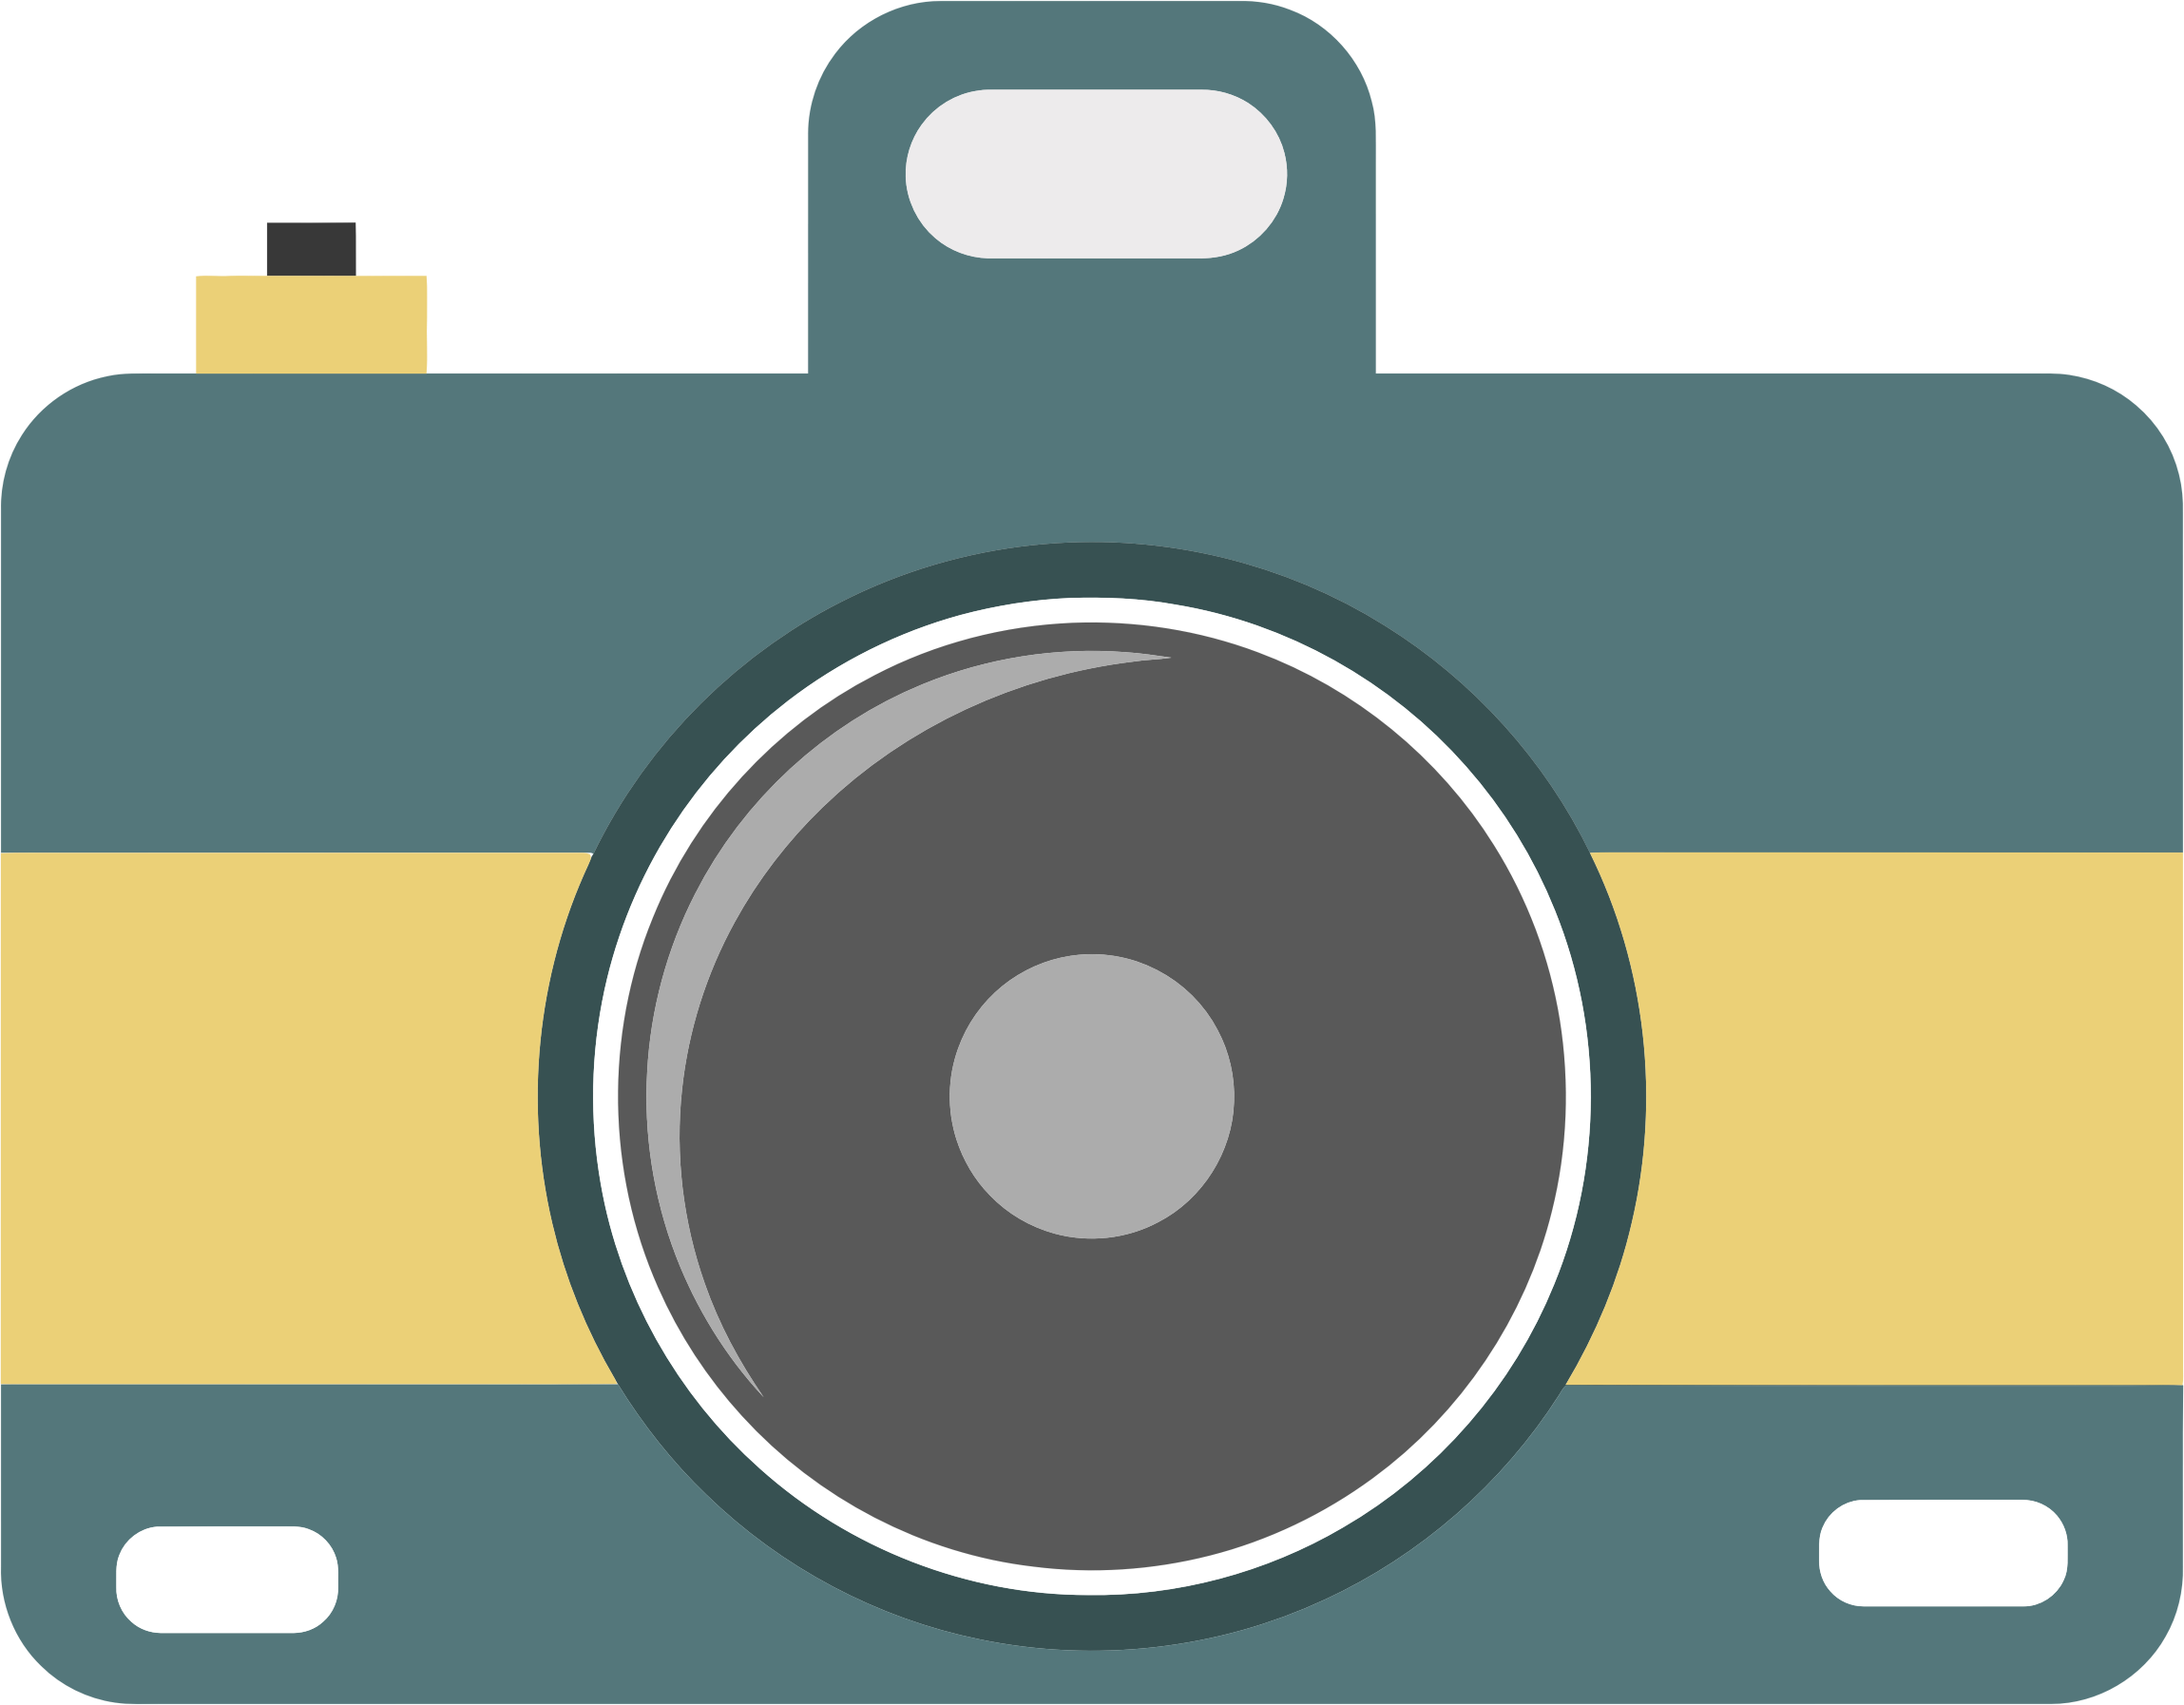 Yearbook clipart colorful camera. Icon pencil and in